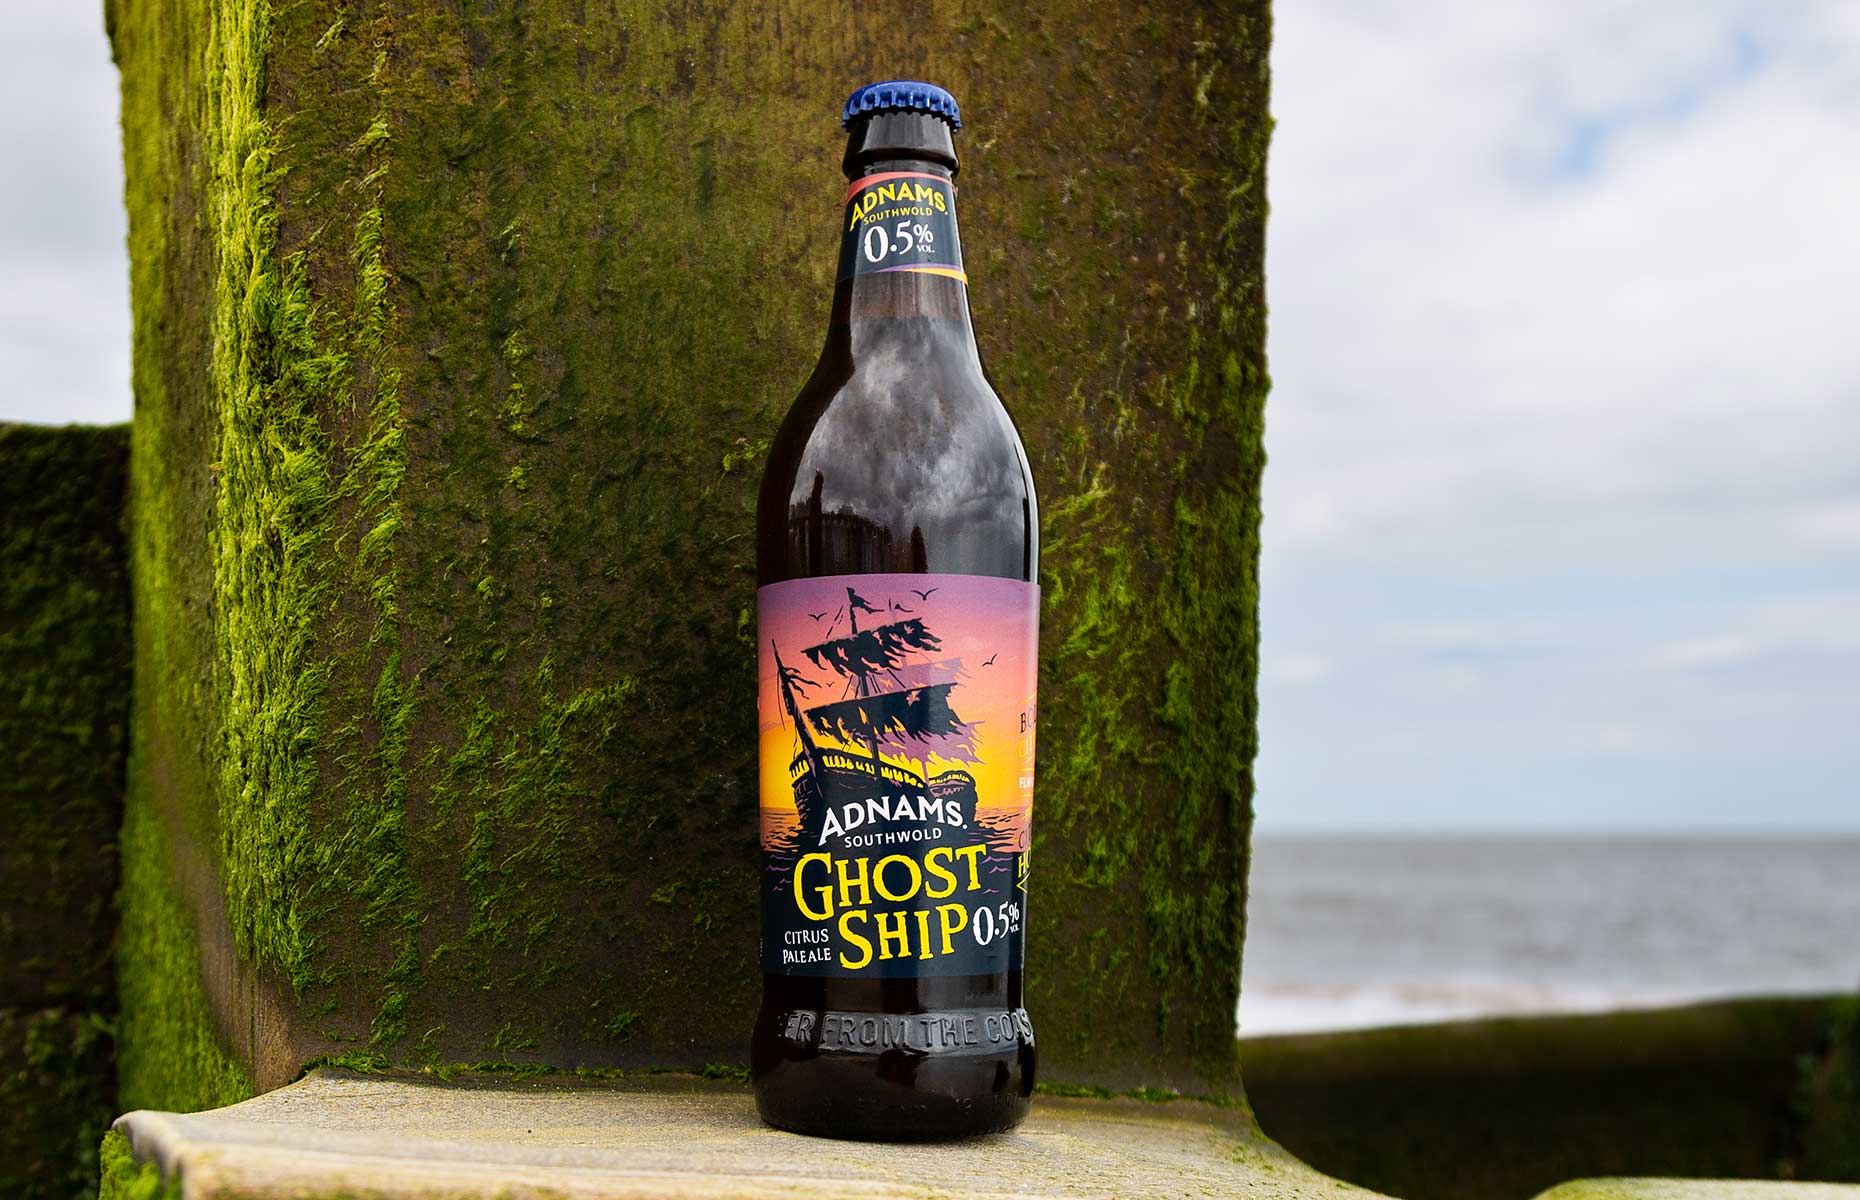 Ghost Ship, low alcohol beer